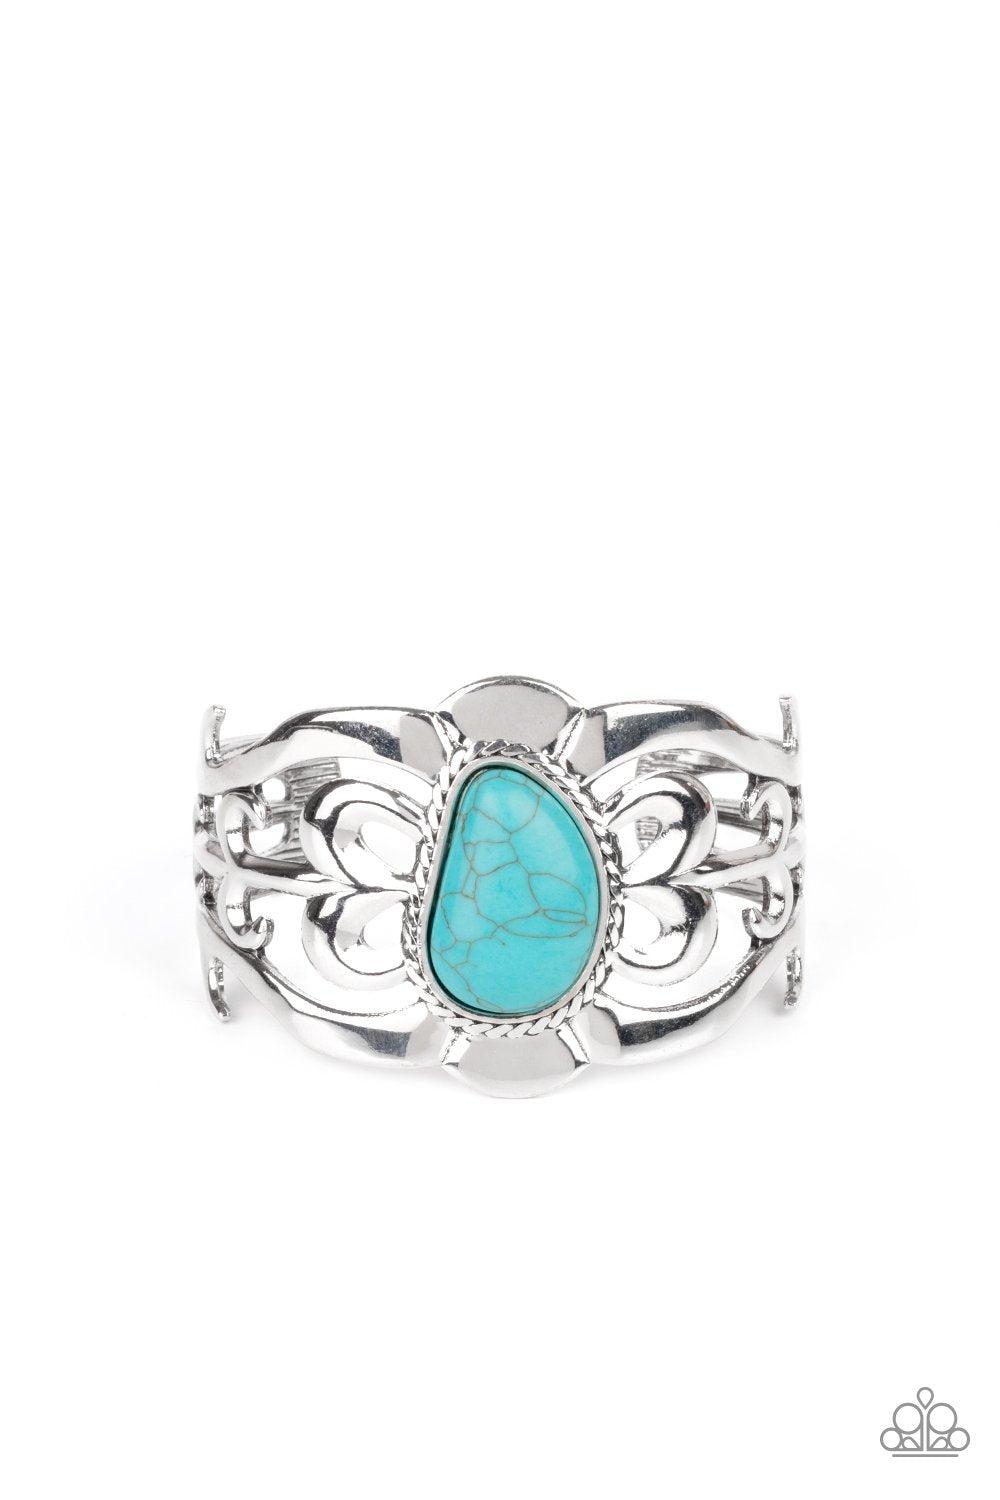 The MESAS are Calling Turquoise Blue Stone and Silver Cuff Bracelet - Paparazzi Accessories- lightbox - CarasShop.com - $5 Jewelry by Cara Jewels